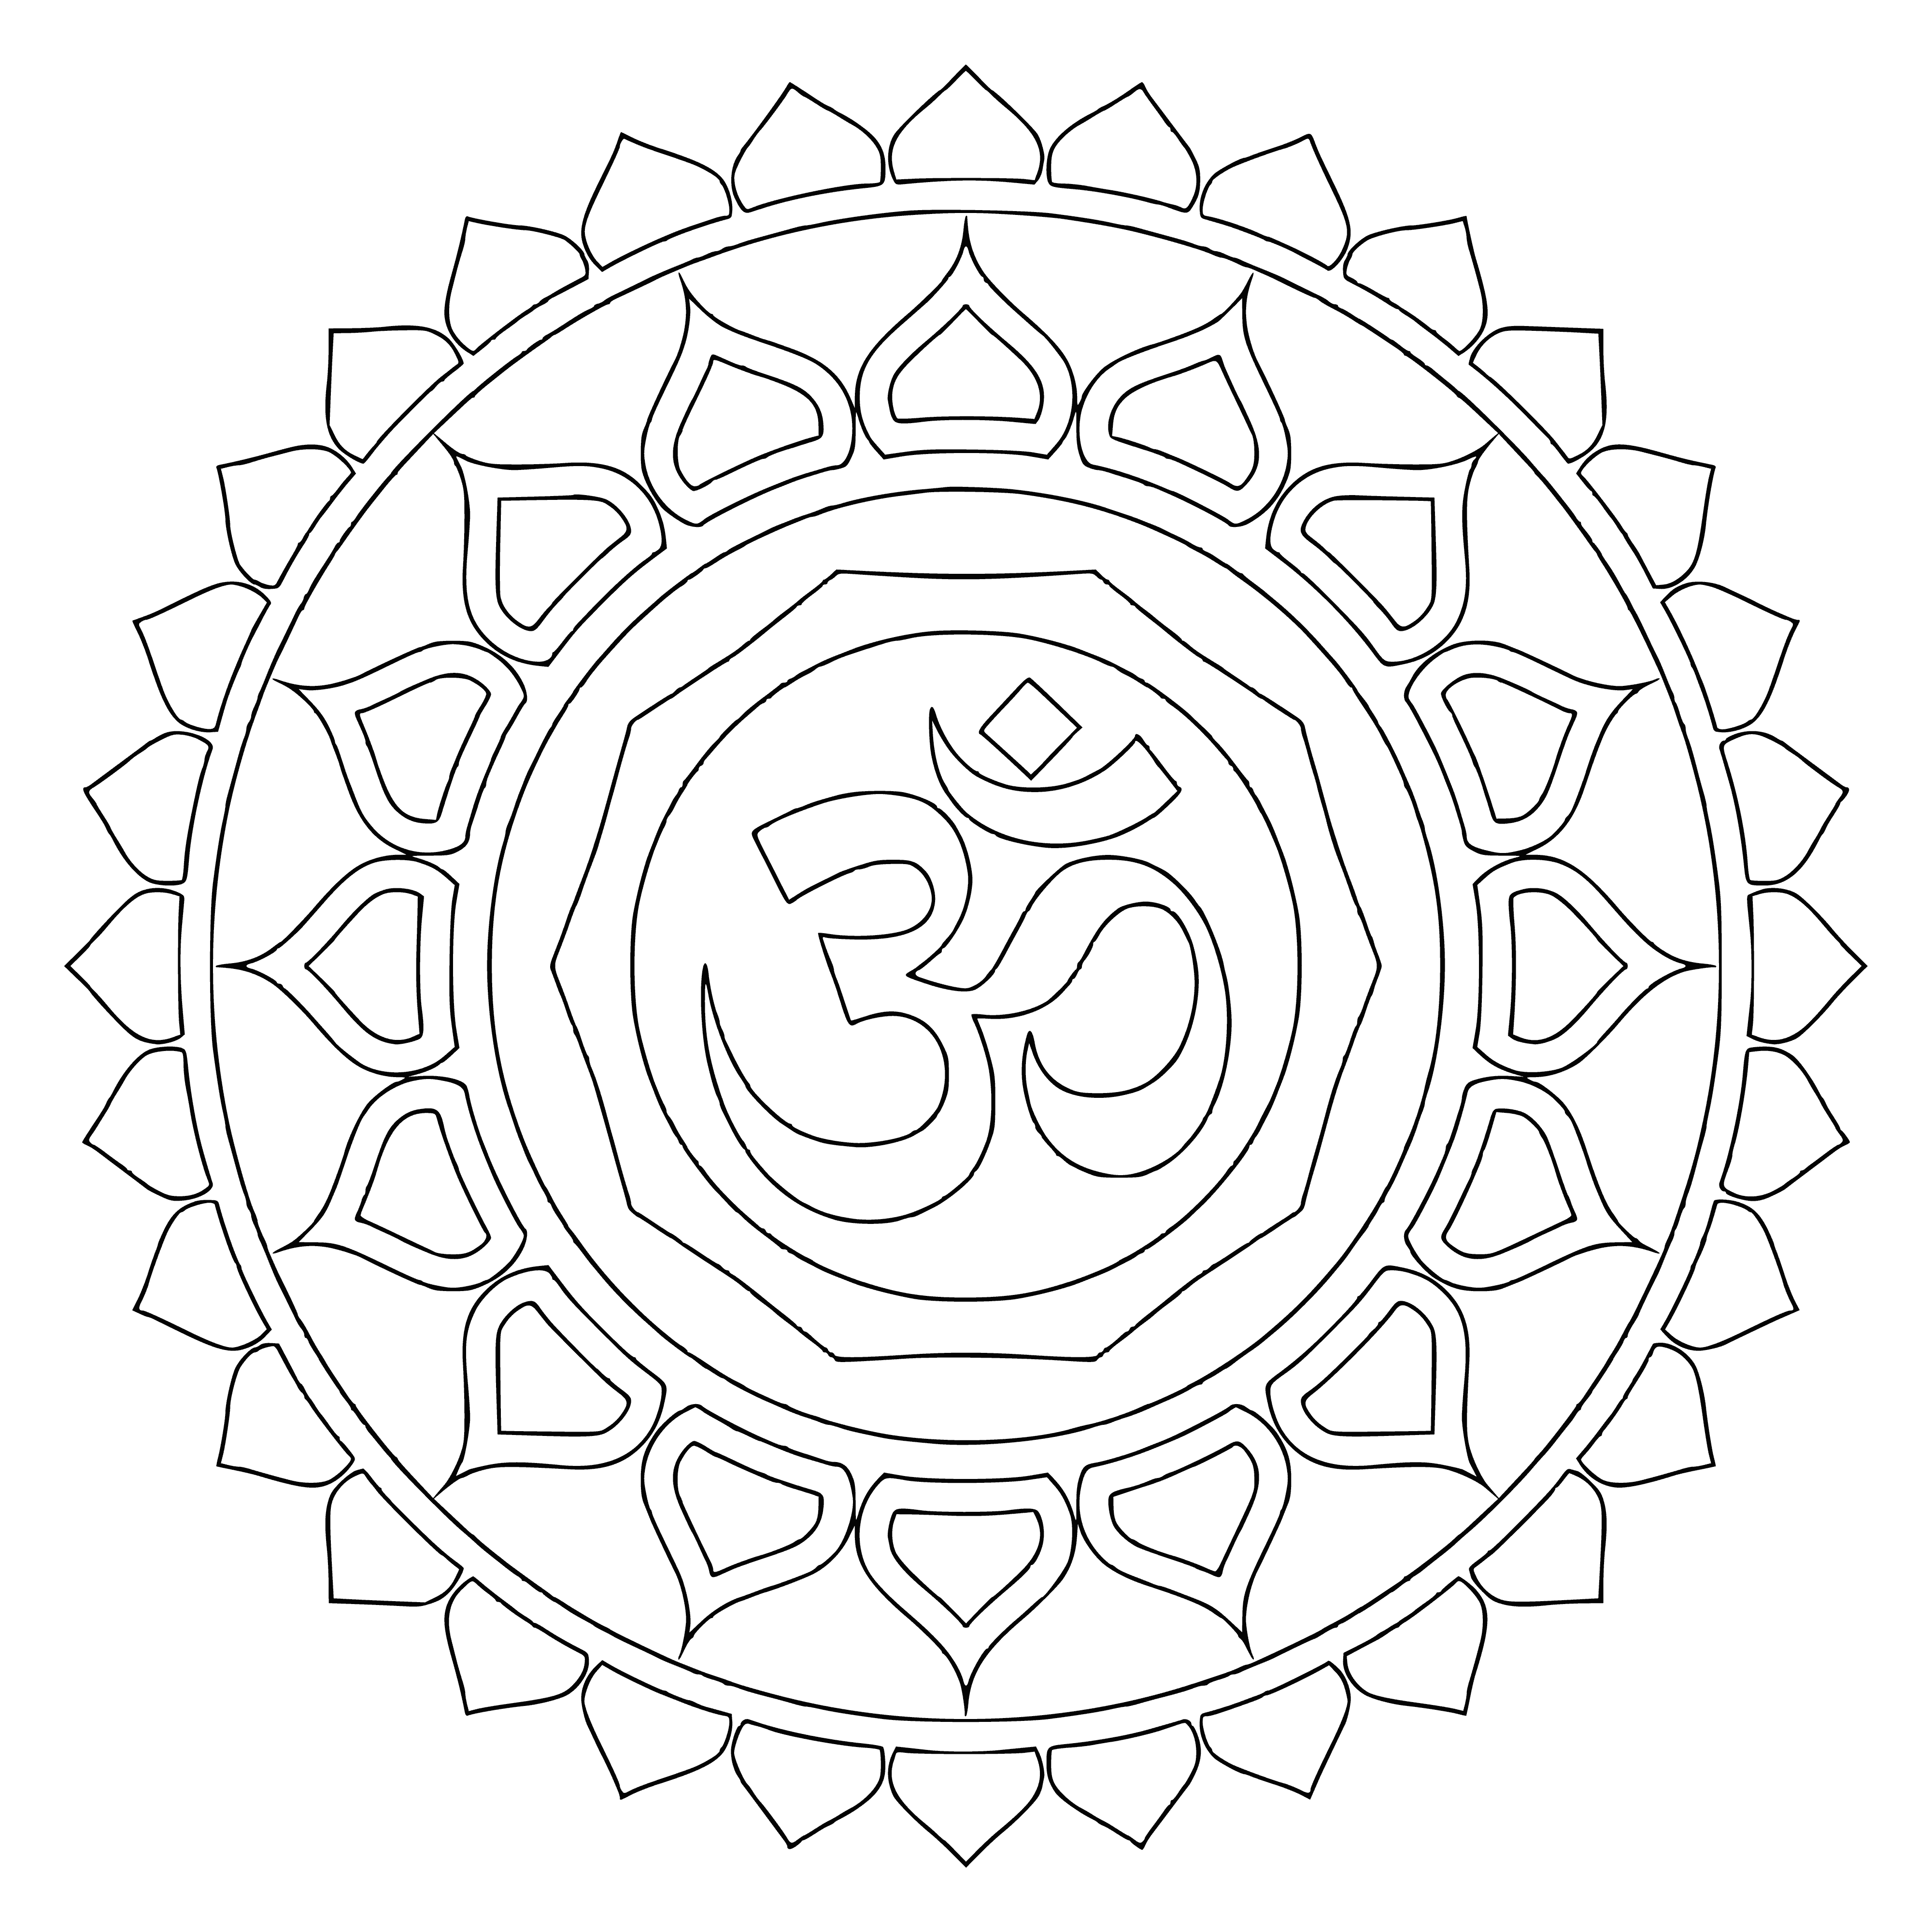 coloring page: Beautiful Mandala featuring the symbol Om in its center and four petals with intricate designs encompassing it.